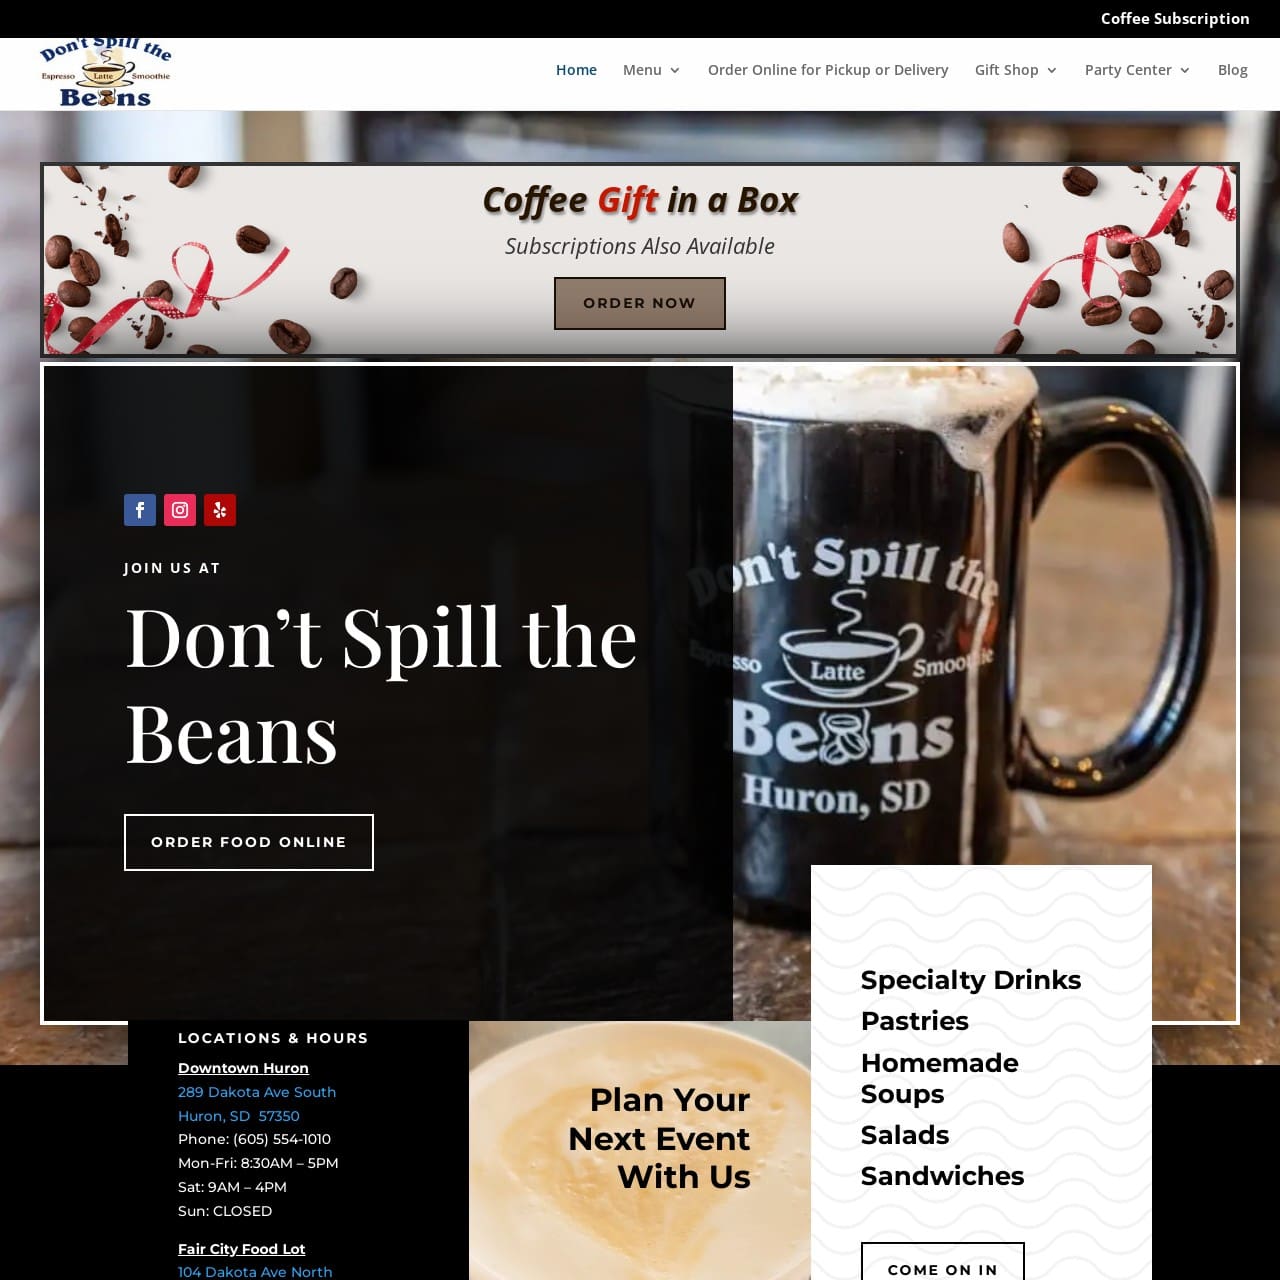 Savor the aroma of success as Shield Bar Marketing empowers Don't Spill the Beans with a full menu website and an online shopping cart, allowing coffee lovers across the United States to indulge in their exquisite coffee beans and delightful gifts.